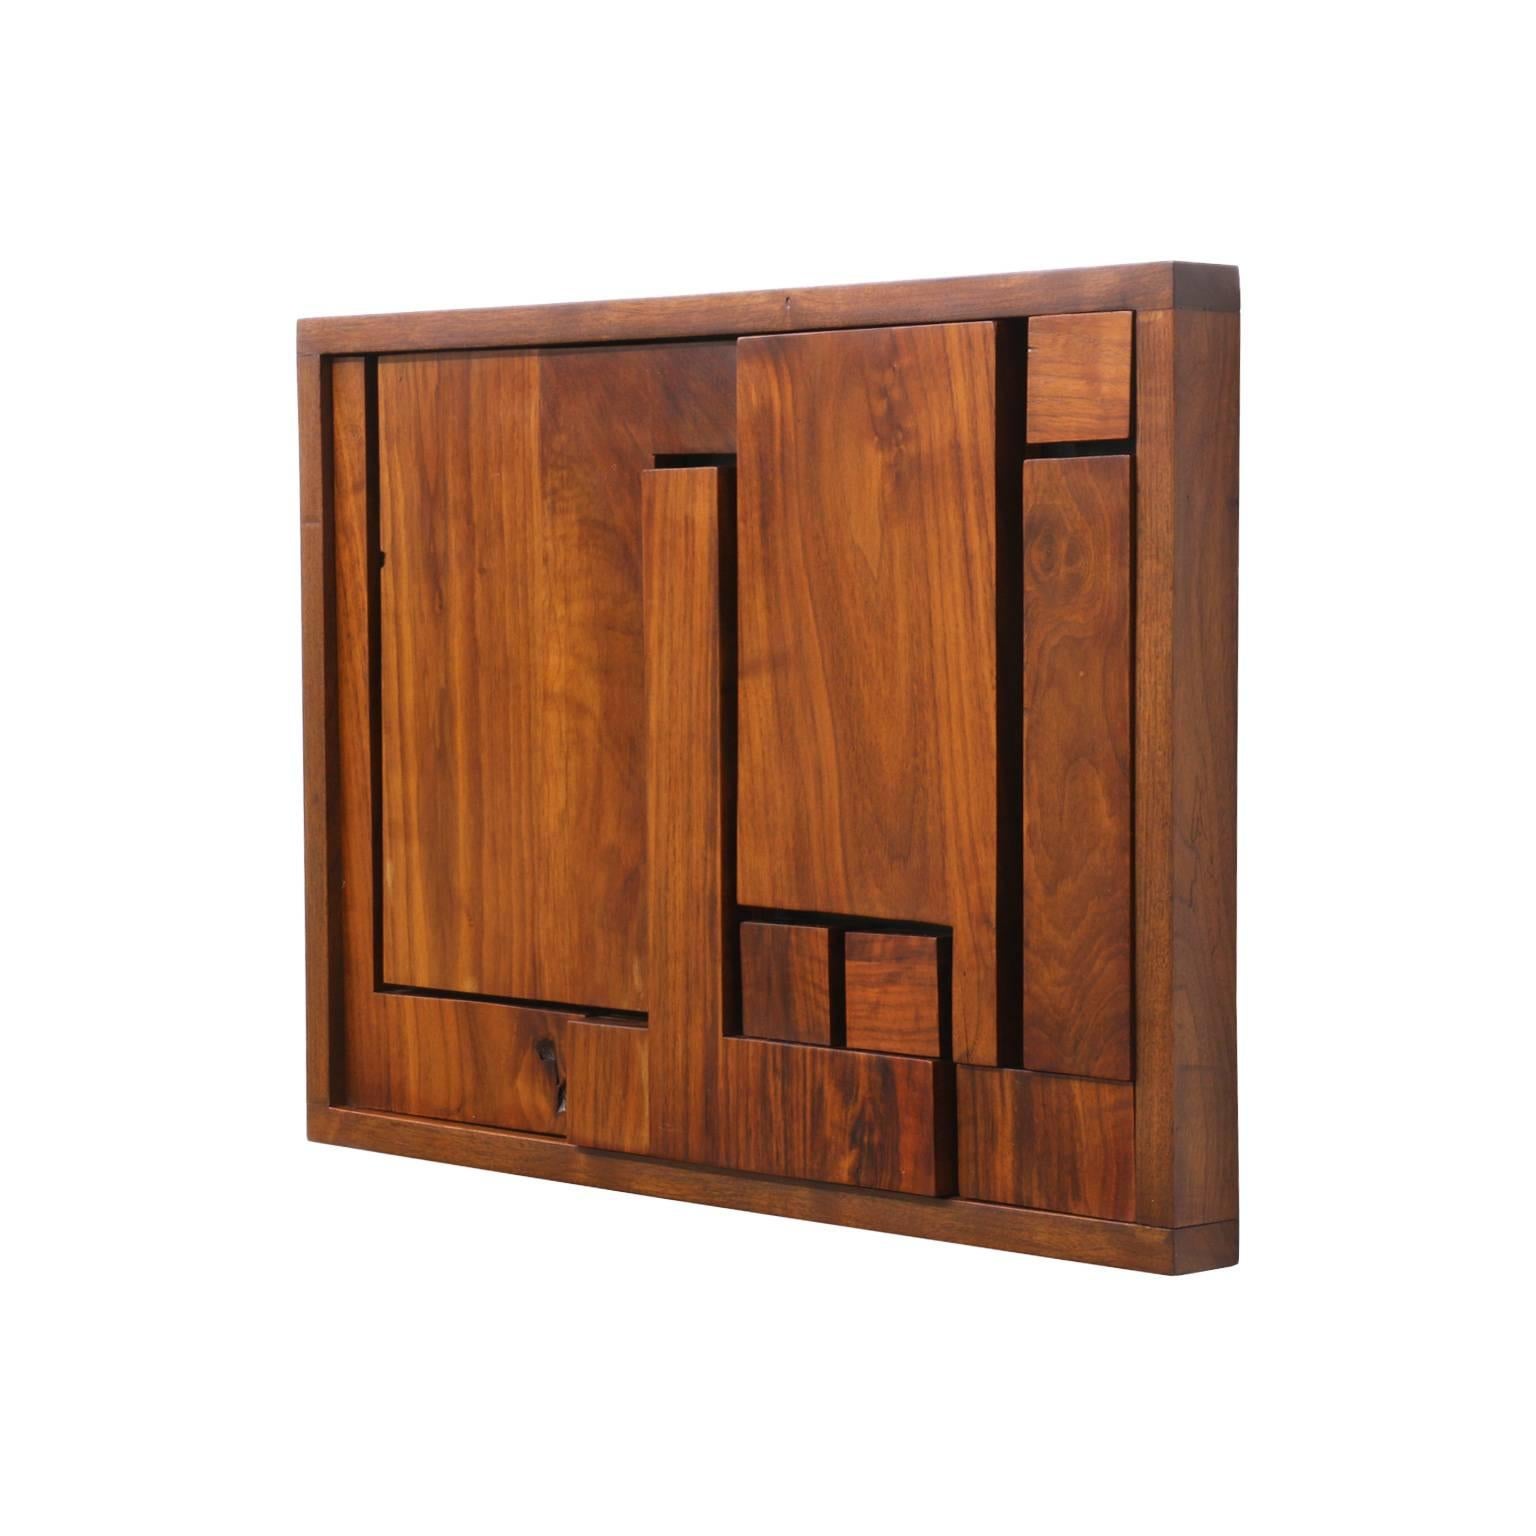 Designer: Unknown.
Manufacturer: Unknown.
Period/Style: Mid-Century Modern.
Country: United States.
Date: 1950s.

Dimensions: 16″ H x 27″ W.
Materials: Walnut.
Condition: Excellent, wear consistent with age and use.
Number of Items: 1
ID